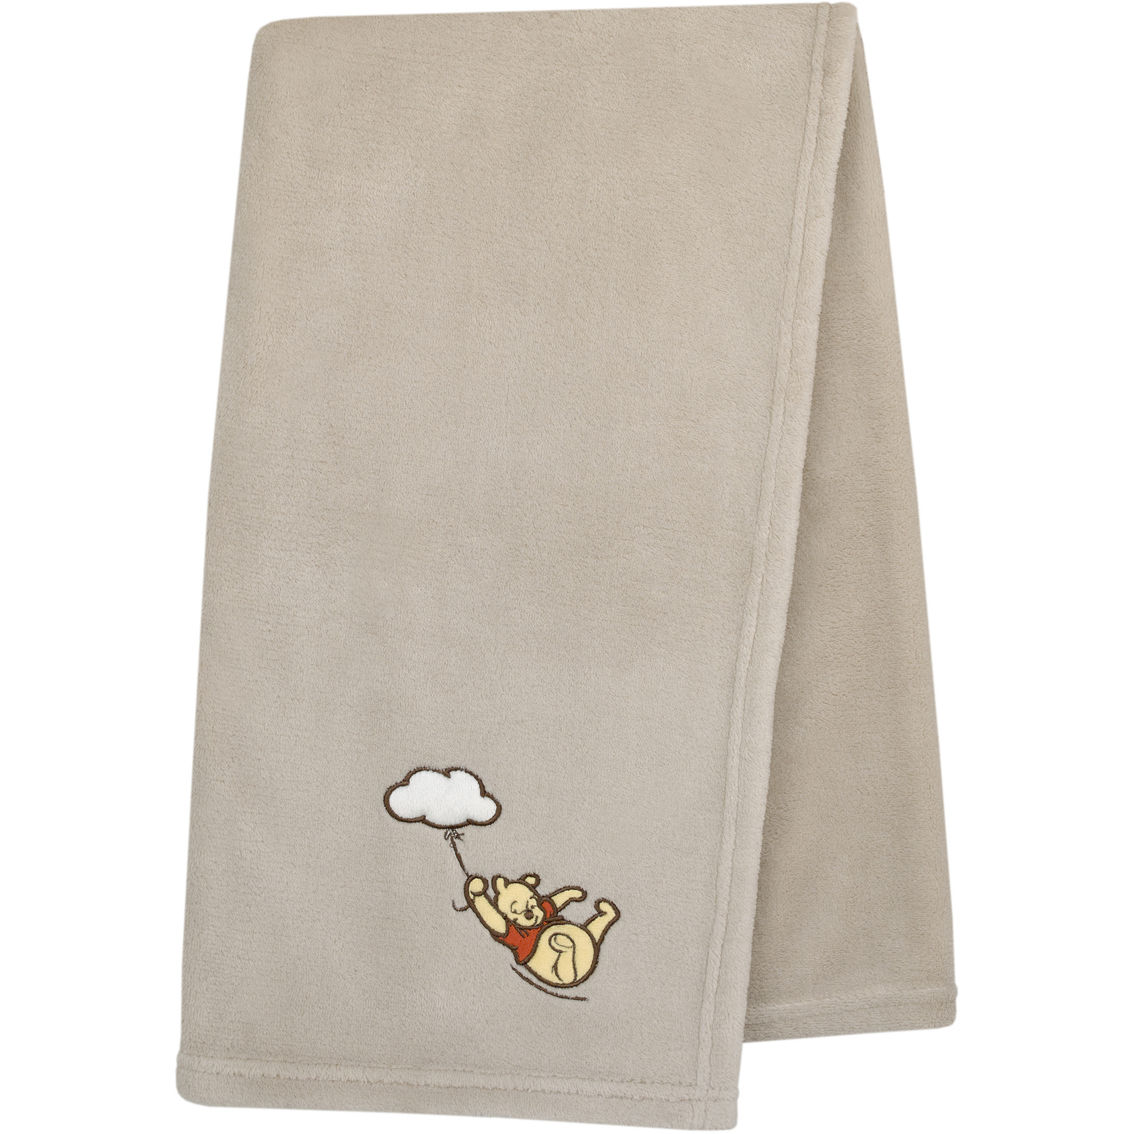 Disney Winnie The Pooh Blustery Day Baby Blanket - Image 2 of 4